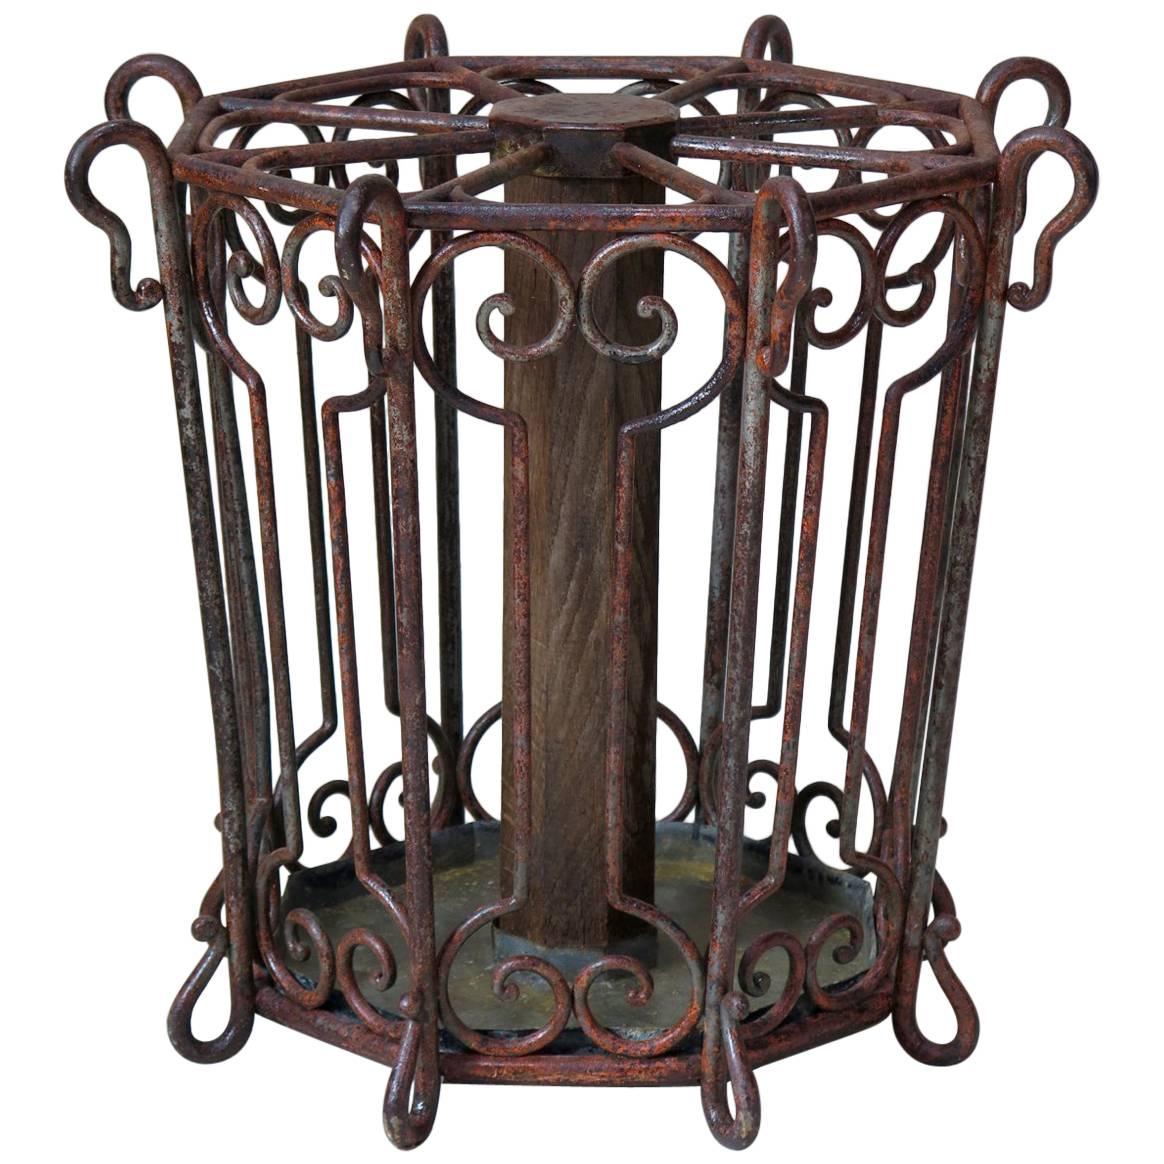 Large Wrought Iron Umbrella Stand, France, Late 19th Century